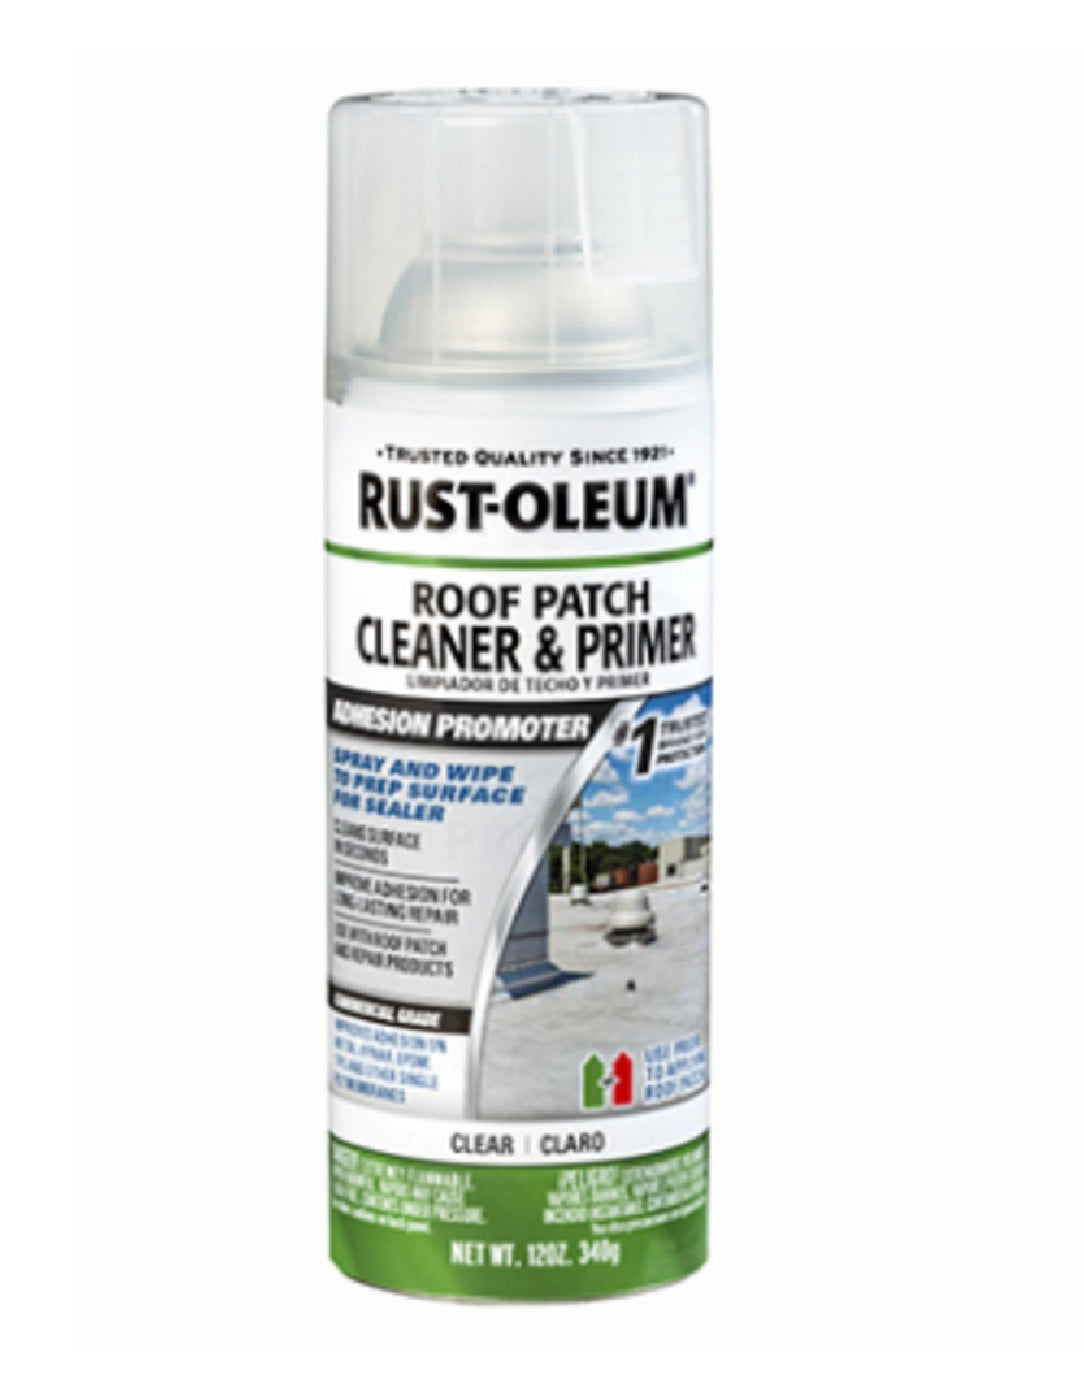 Rust-Oleum 345815 Roof Patch Cleaner & Primer, Clear, 12 Ounce